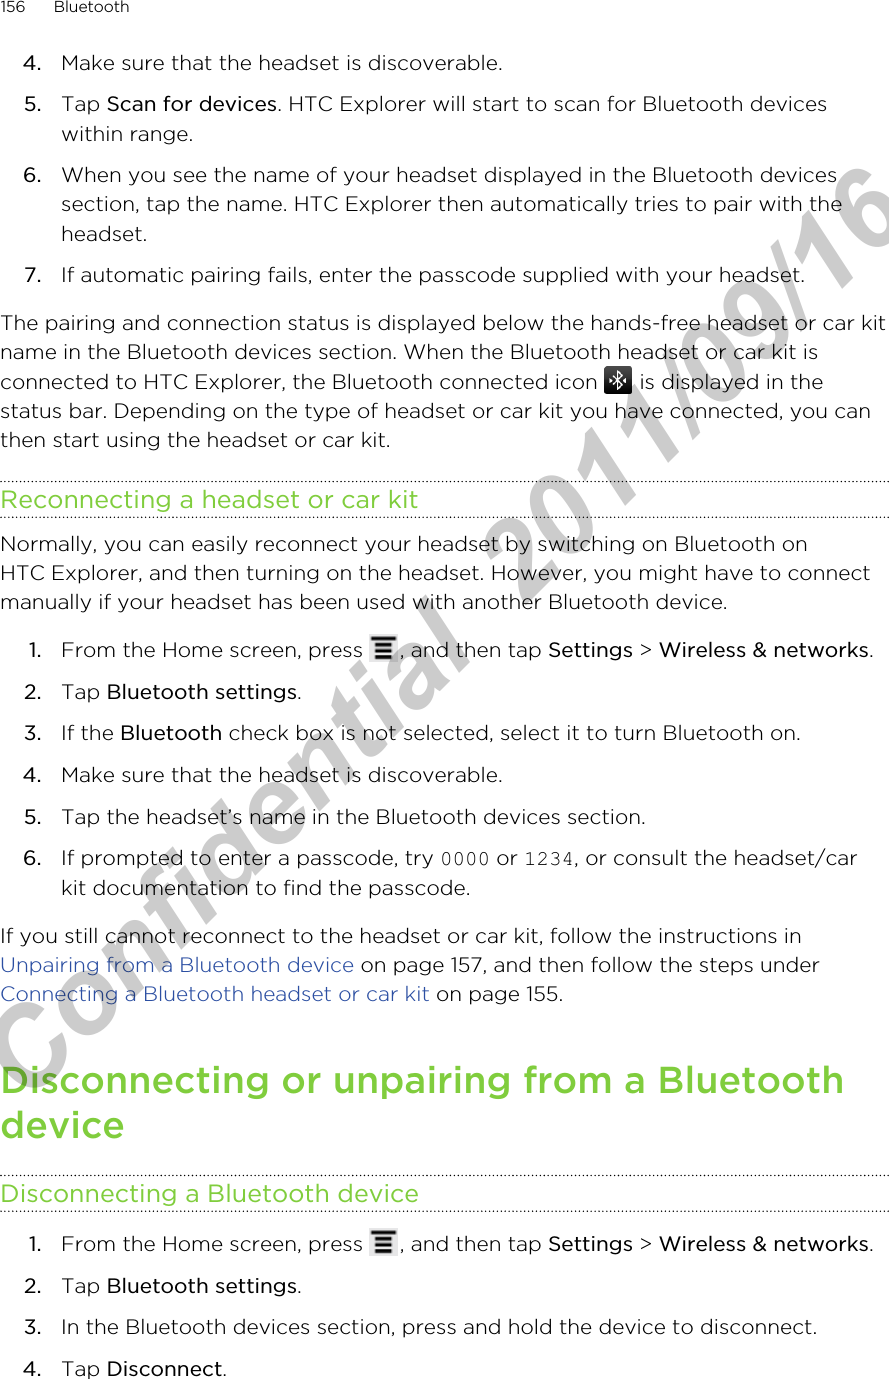 4. Make sure that the headset is discoverable.5. Tap Scan for devices. HTC Explorer will start to scan for Bluetooth deviceswithin range.6. When you see the name of your headset displayed in the Bluetooth devicessection, tap the name. HTC Explorer then automatically tries to pair with theheadset.7. If automatic pairing fails, enter the passcode supplied with your headset.The pairing and connection status is displayed below the hands-free headset or car kitname in the Bluetooth devices section. When the Bluetooth headset or car kit isconnected to HTC Explorer, the Bluetooth connected icon   is displayed in thestatus bar. Depending on the type of headset or car kit you have connected, you canthen start using the headset or car kit.Reconnecting a headset or car kitNormally, you can easily reconnect your headset by switching on Bluetooth onHTC Explorer, and then turning on the headset. However, you might have to connectmanually if your headset has been used with another Bluetooth device.1. From the Home screen, press  , and then tap Settings &gt; Wireless &amp; networks.2. Tap Bluetooth settings.3. If the Bluetooth check box is not selected, select it to turn Bluetooth on.4. Make sure that the headset is discoverable.5. Tap the headset’s name in the Bluetooth devices section.6. If prompted to enter a passcode, try 0000 or 1234, or consult the headset/carkit documentation to find the passcode.If you still cannot reconnect to the headset or car kit, follow the instructions in Unpairing from a Bluetooth device on page 157, and then follow the steps under Connecting a Bluetooth headset or car kit on page 155.Disconnecting or unpairing from a BluetoothdeviceDisconnecting a Bluetooth device1. From the Home screen, press  , and then tap Settings &gt; Wireless &amp; networks.2. Tap Bluetooth settings.3. In the Bluetooth devices section, press and hold the device to disconnect.4. Tap Disconnect.156 BluetoothHTC Confidential  2011/09/16 